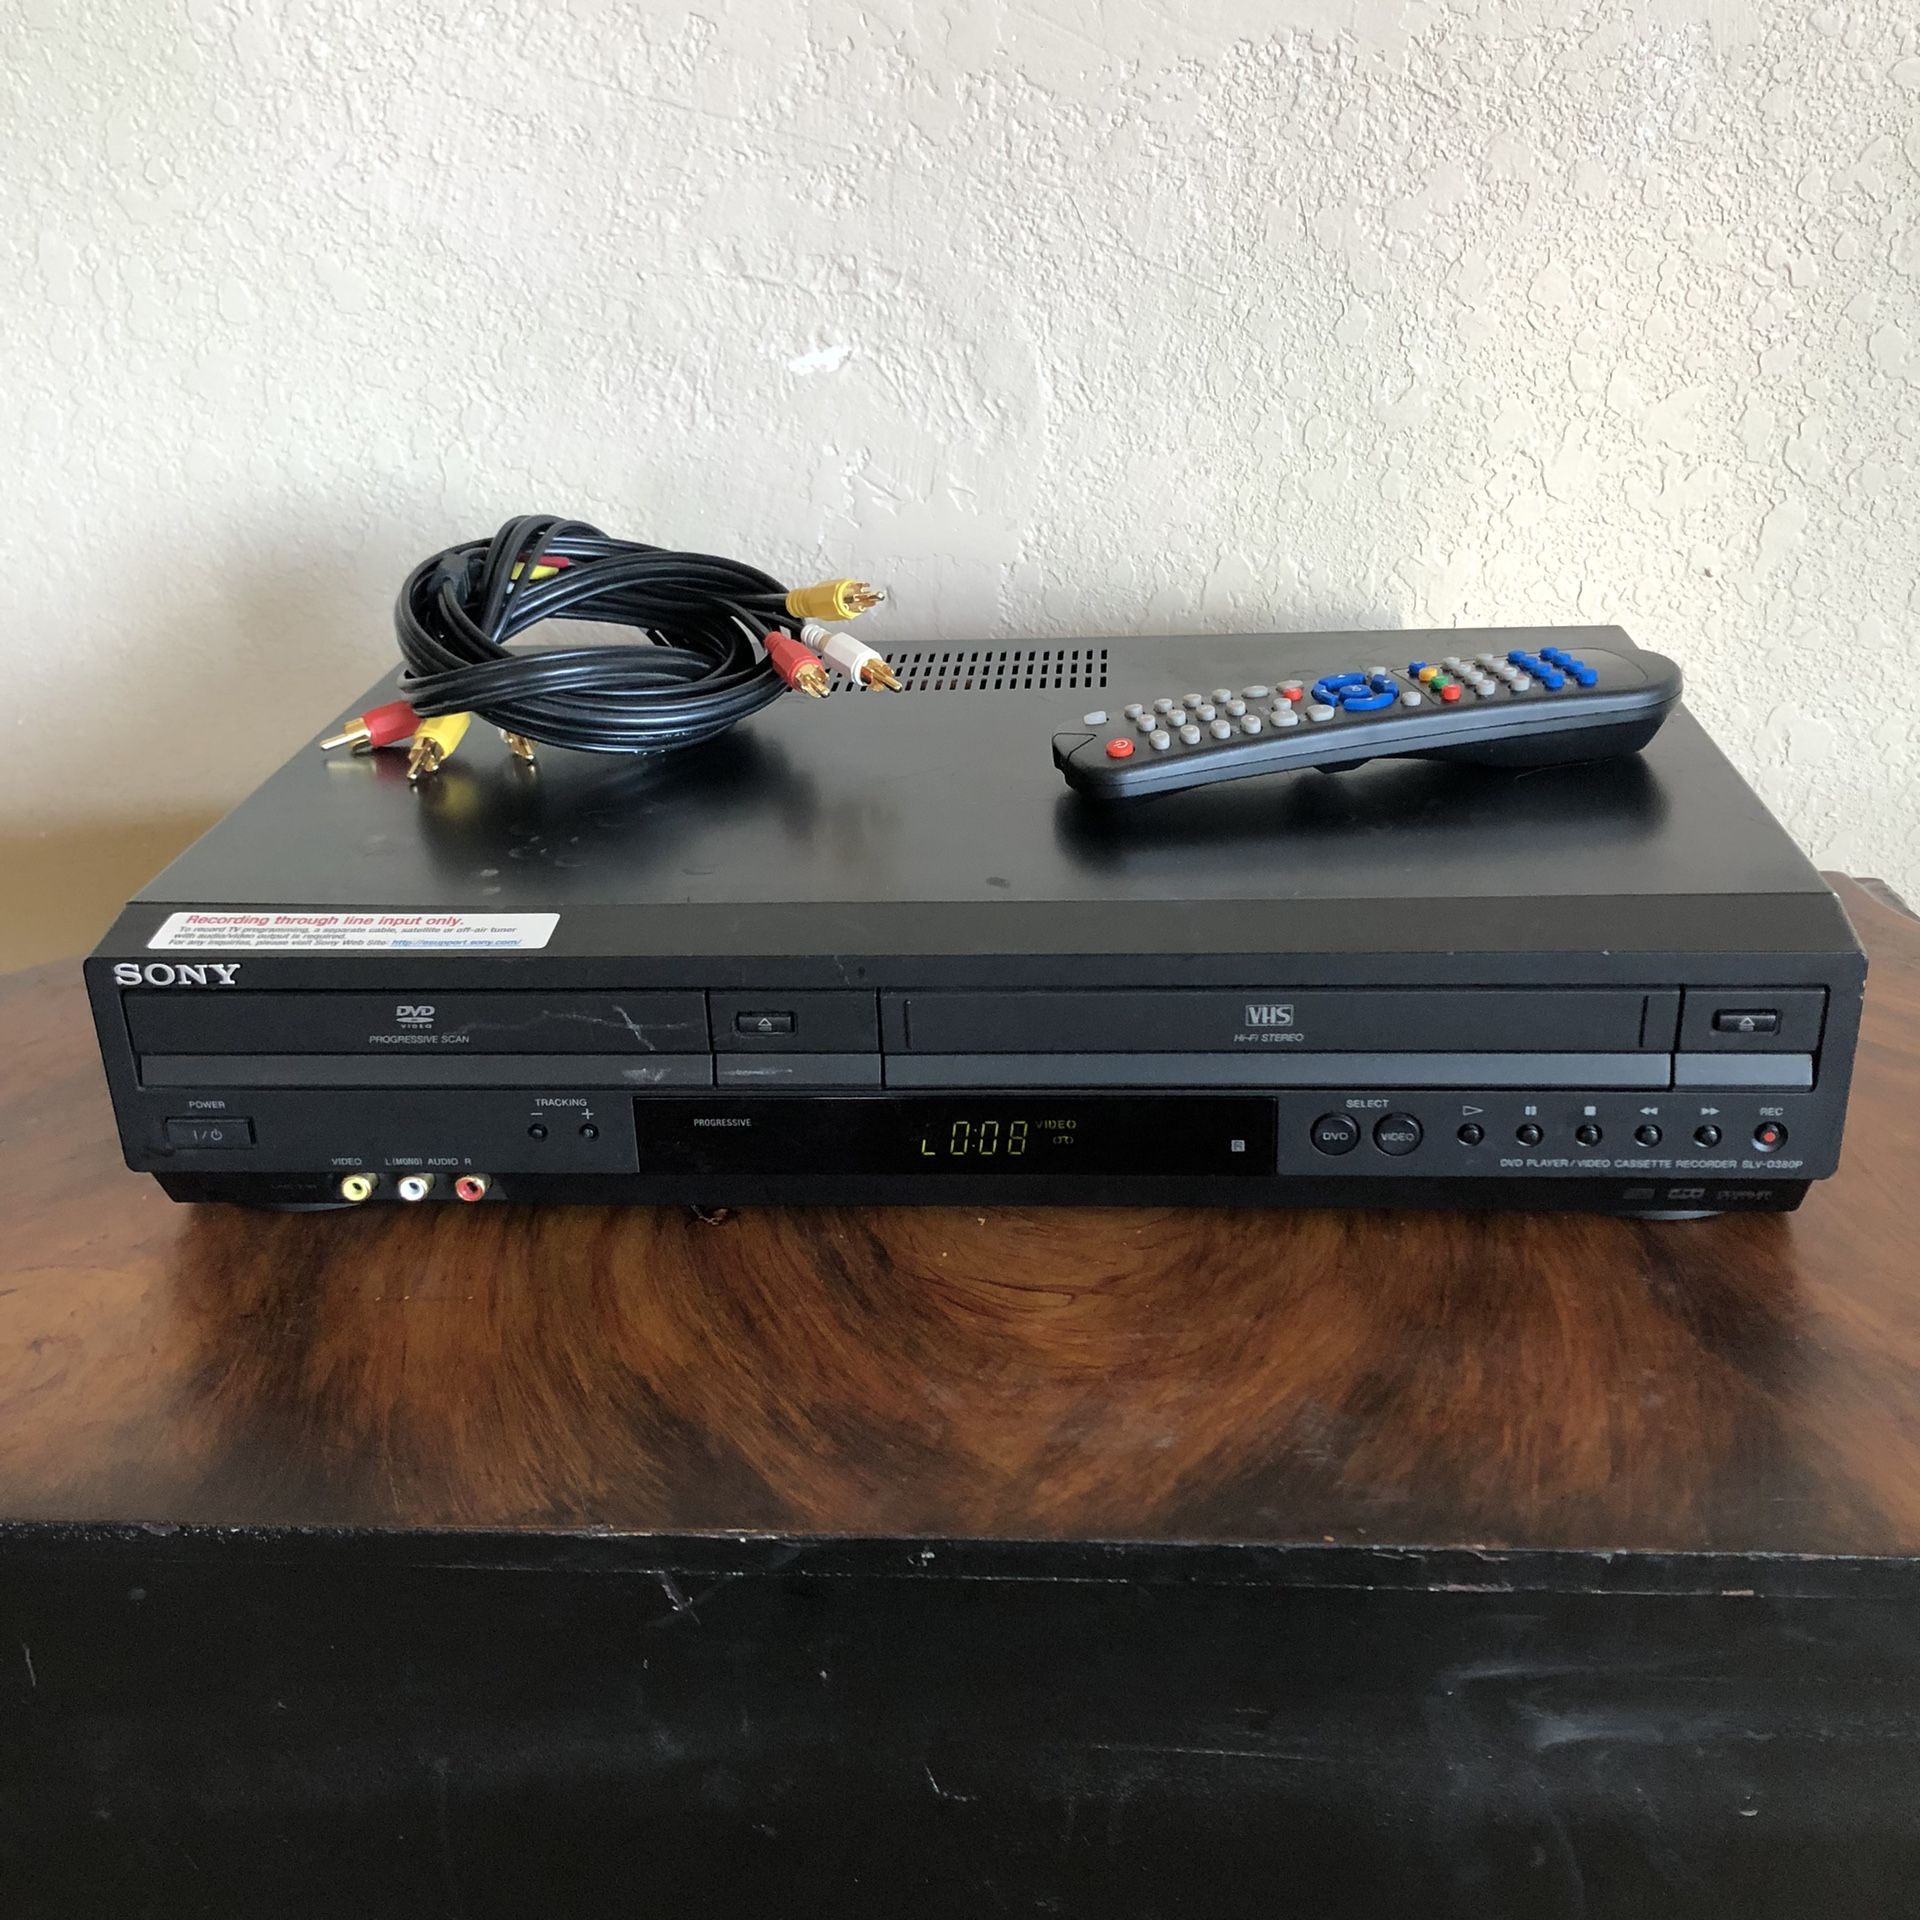 Sony SLV-D380P DVD VHS Player VCR Tape Recorder with Remote Control